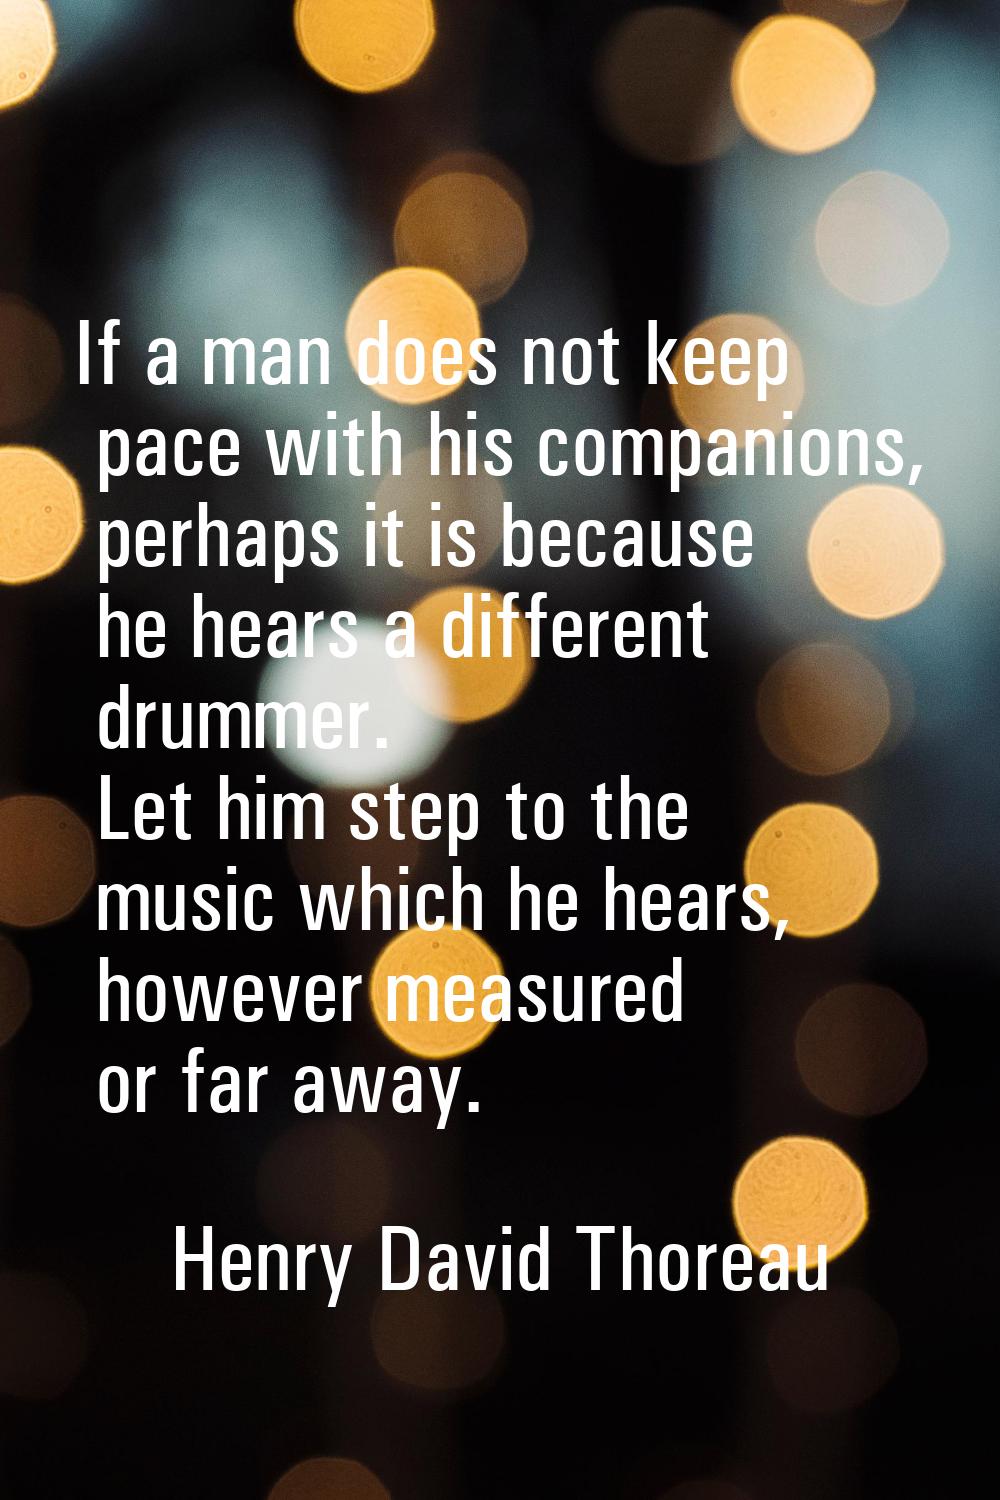 If a man does not keep pace with his companions, perhaps it is because he hears a different drummer